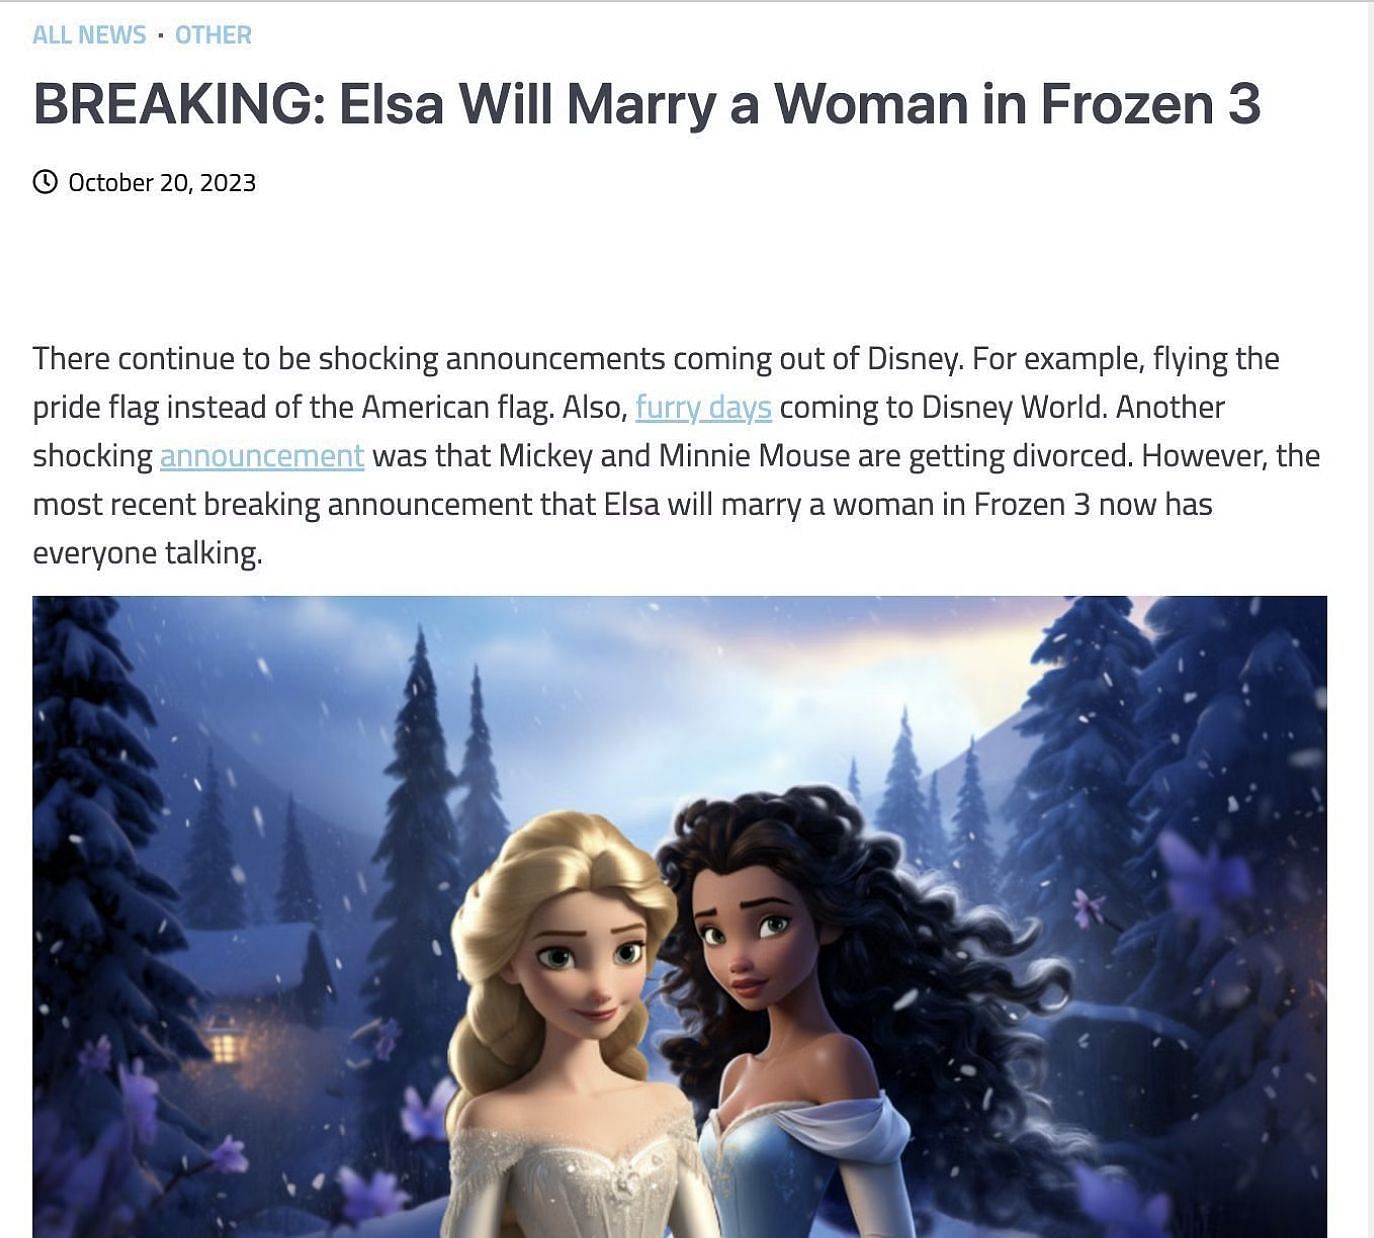 Website published a fake article claiming that the main character in Frozen 3 will marry a woman: Fake news debunked. (Image via Mouse Trap News)